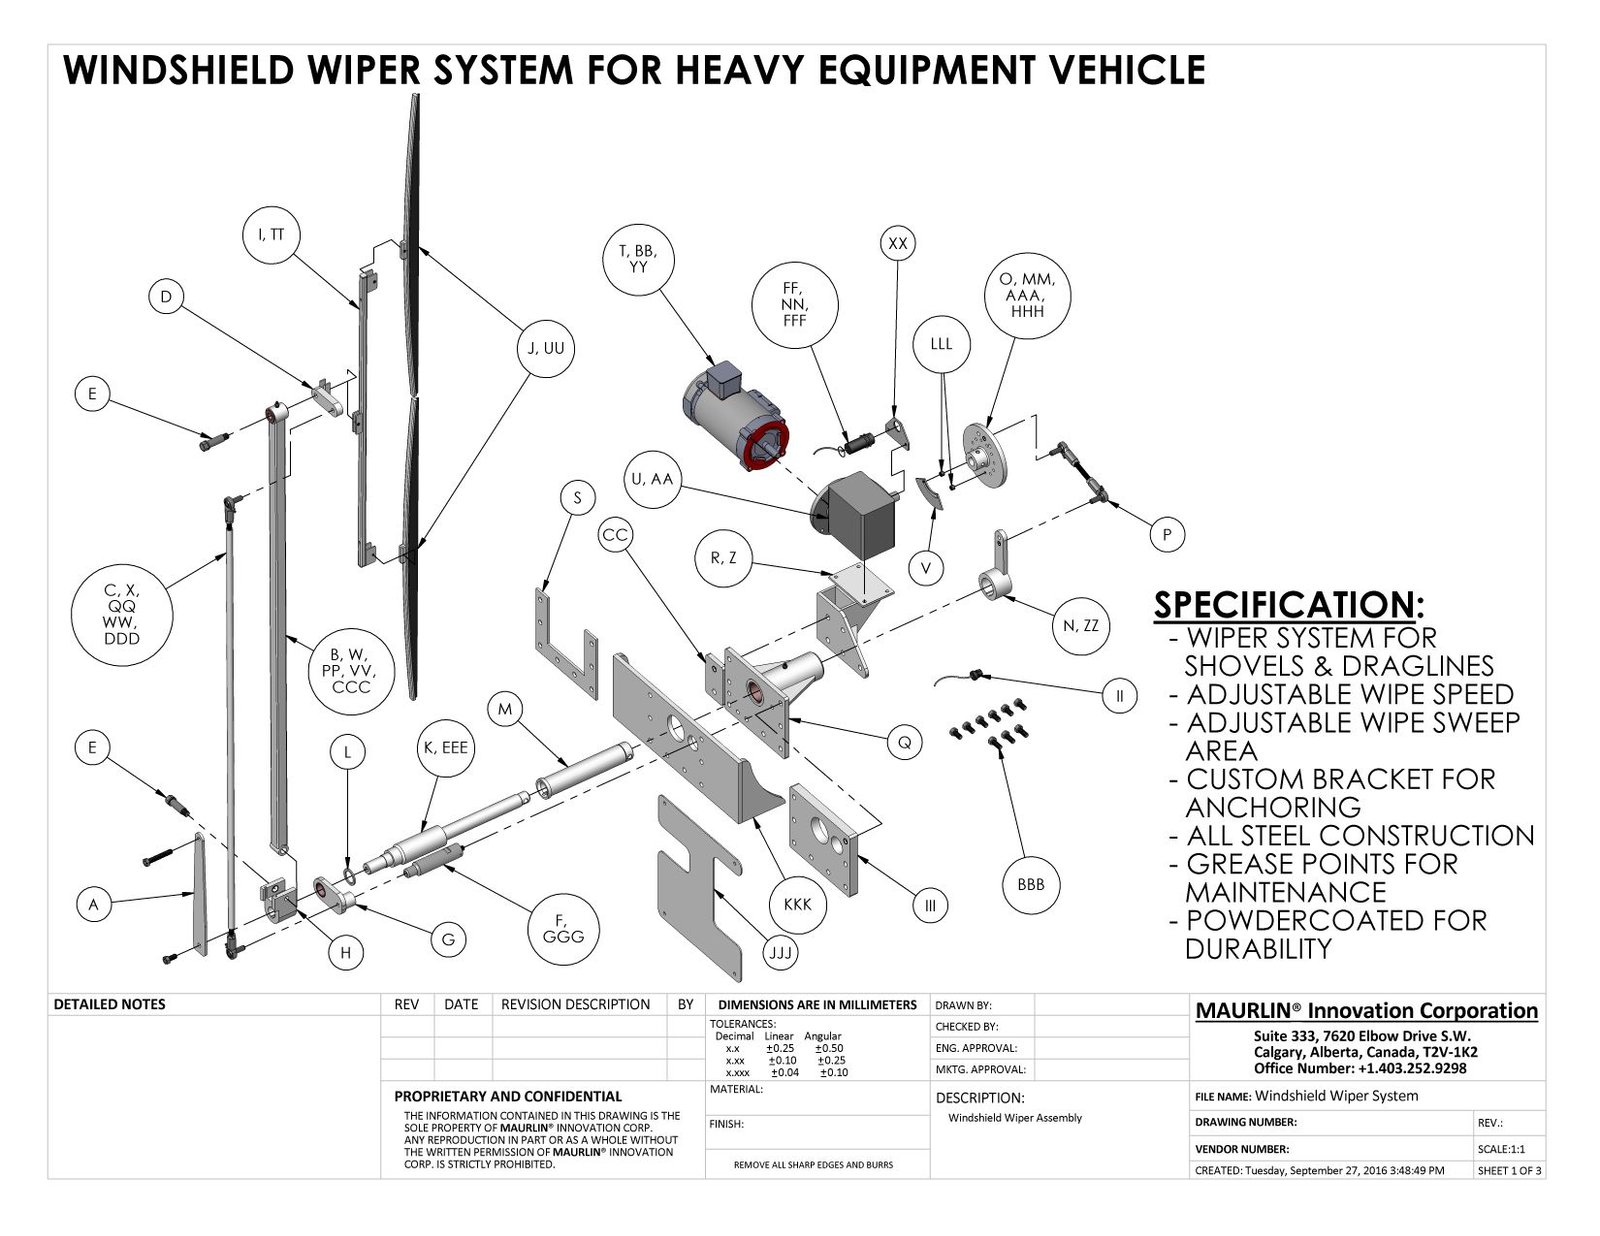 6 speed windshield wiper for heavy equipment exploded view